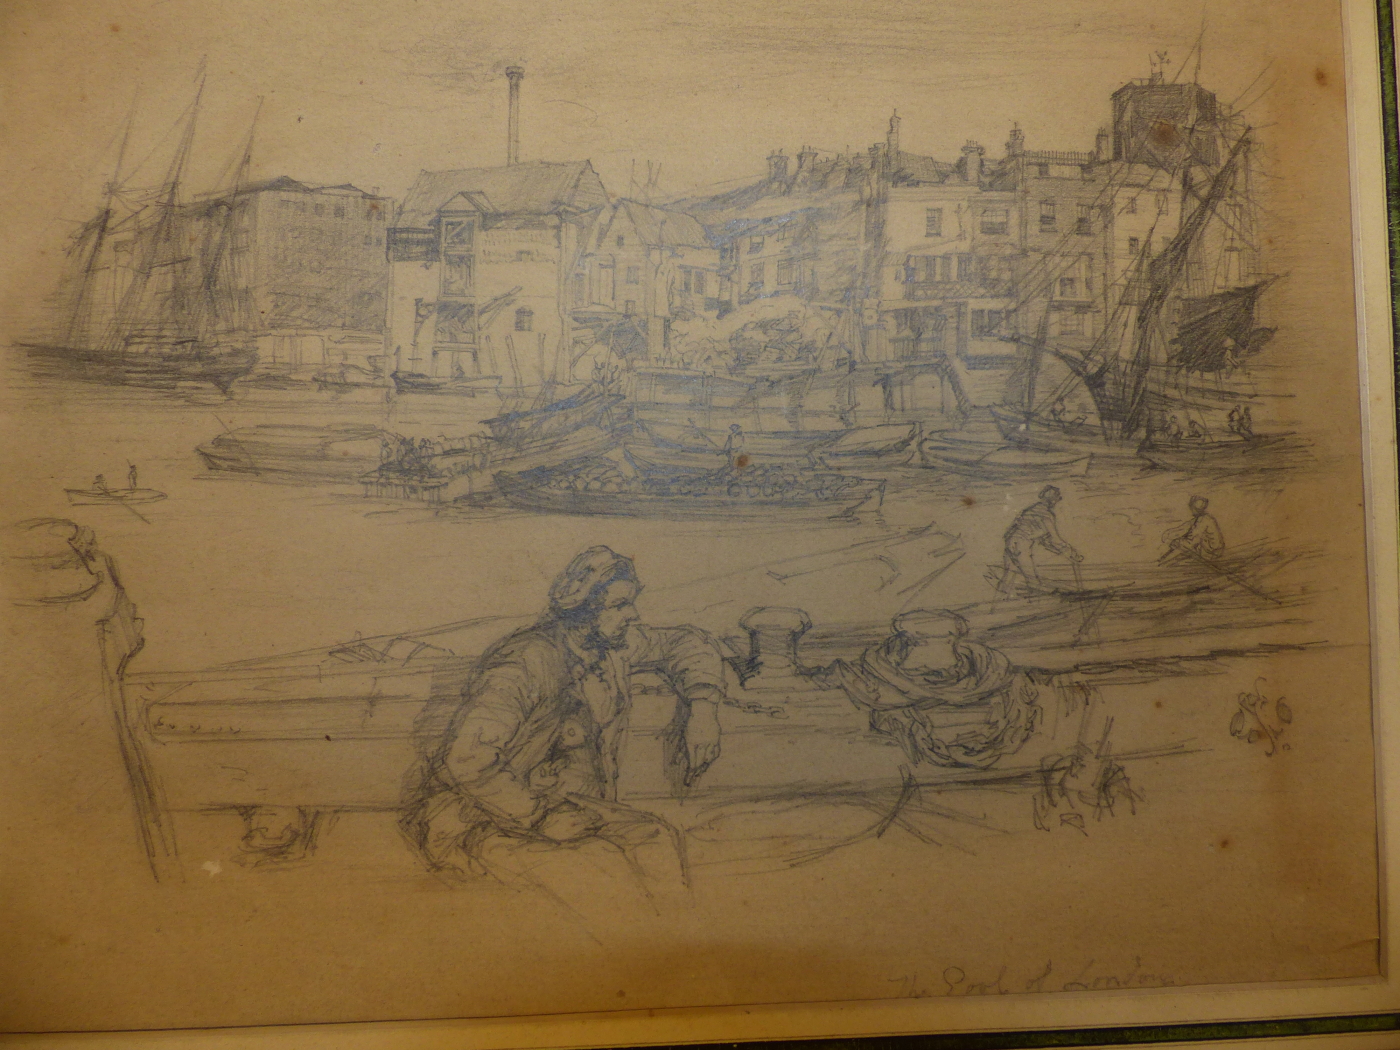 LATE 19th.C. ENGLISH SCHOOL. THE POOL OF LONDON, PENCIL DRAWING, UNFRAMED. 20 x 26cms. - Image 4 of 5